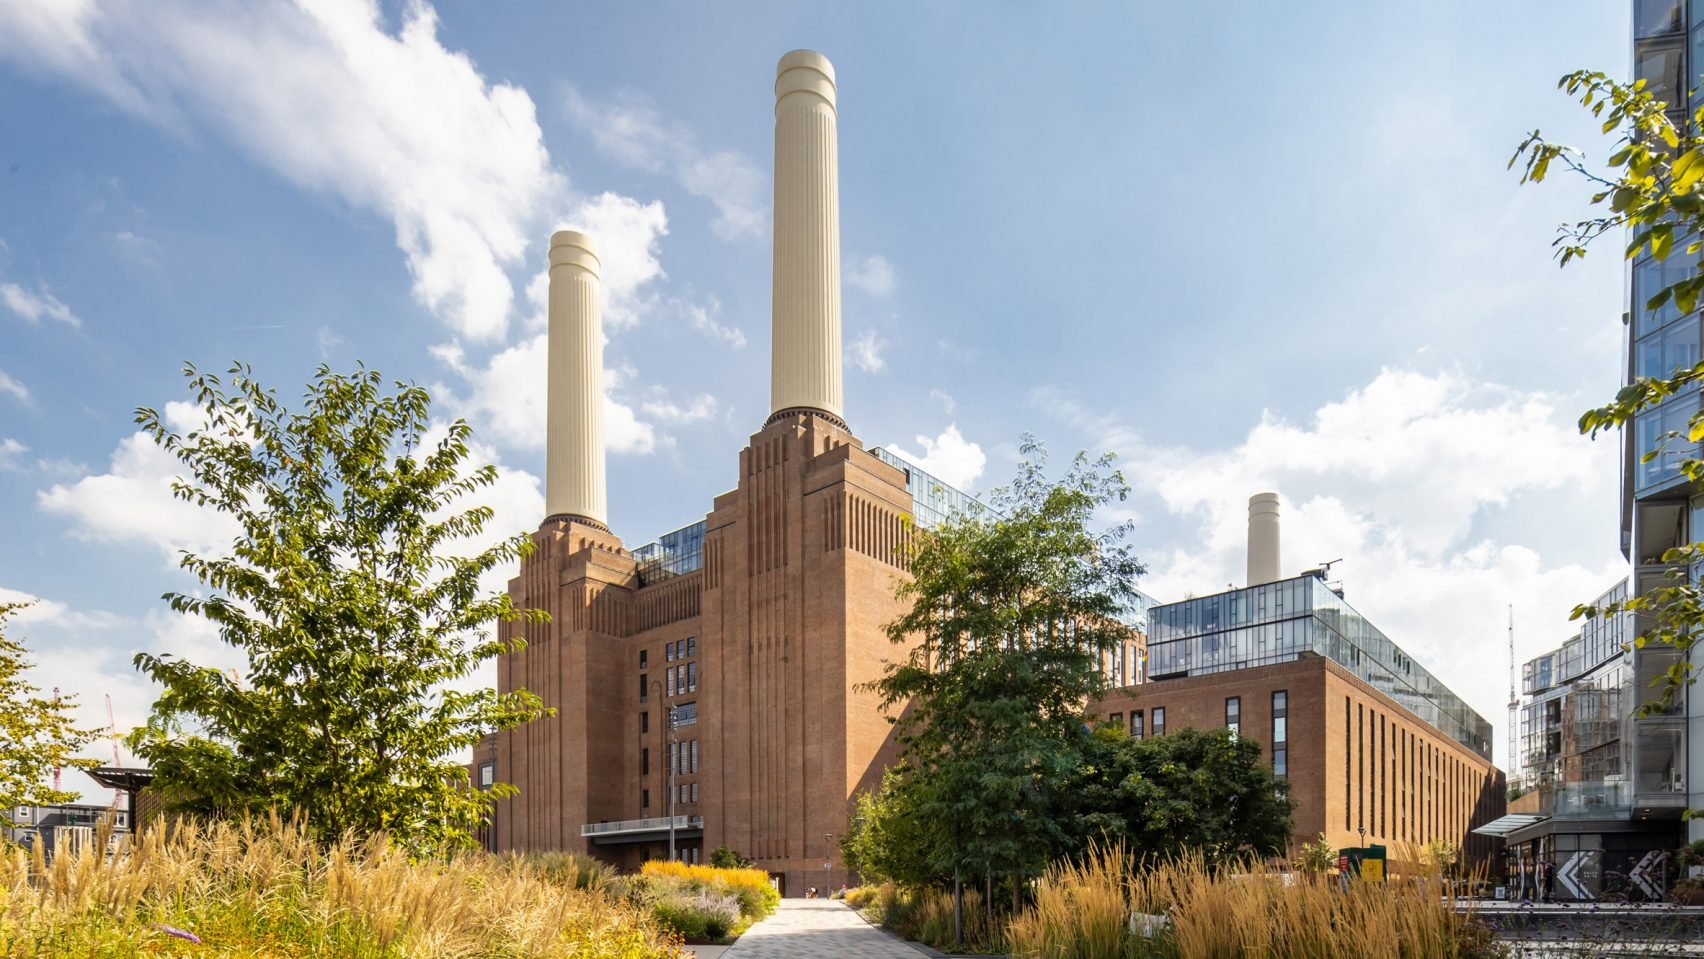 The redevelopment of Battersea Power Station has been completed